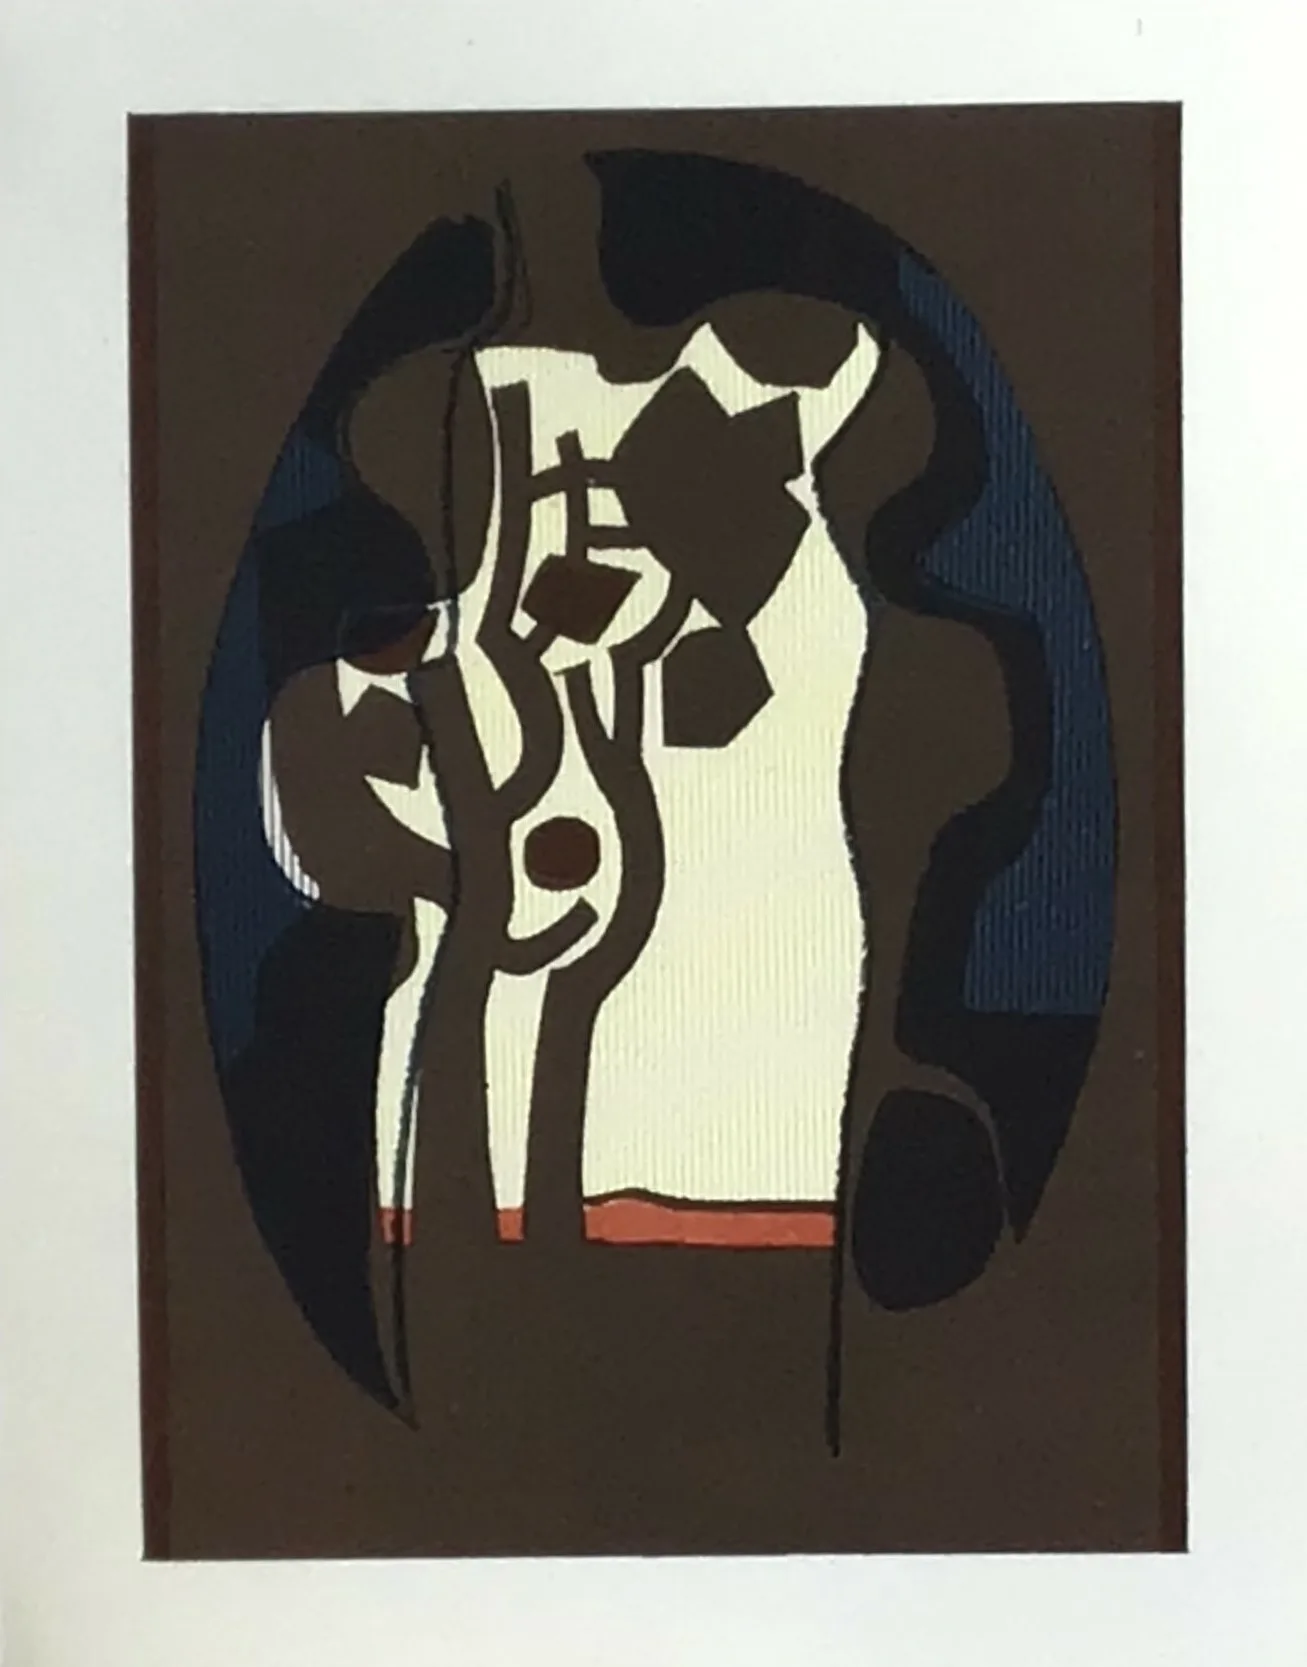 1979 Andre Minaux Original Lithograph Minaux Abstract Trees